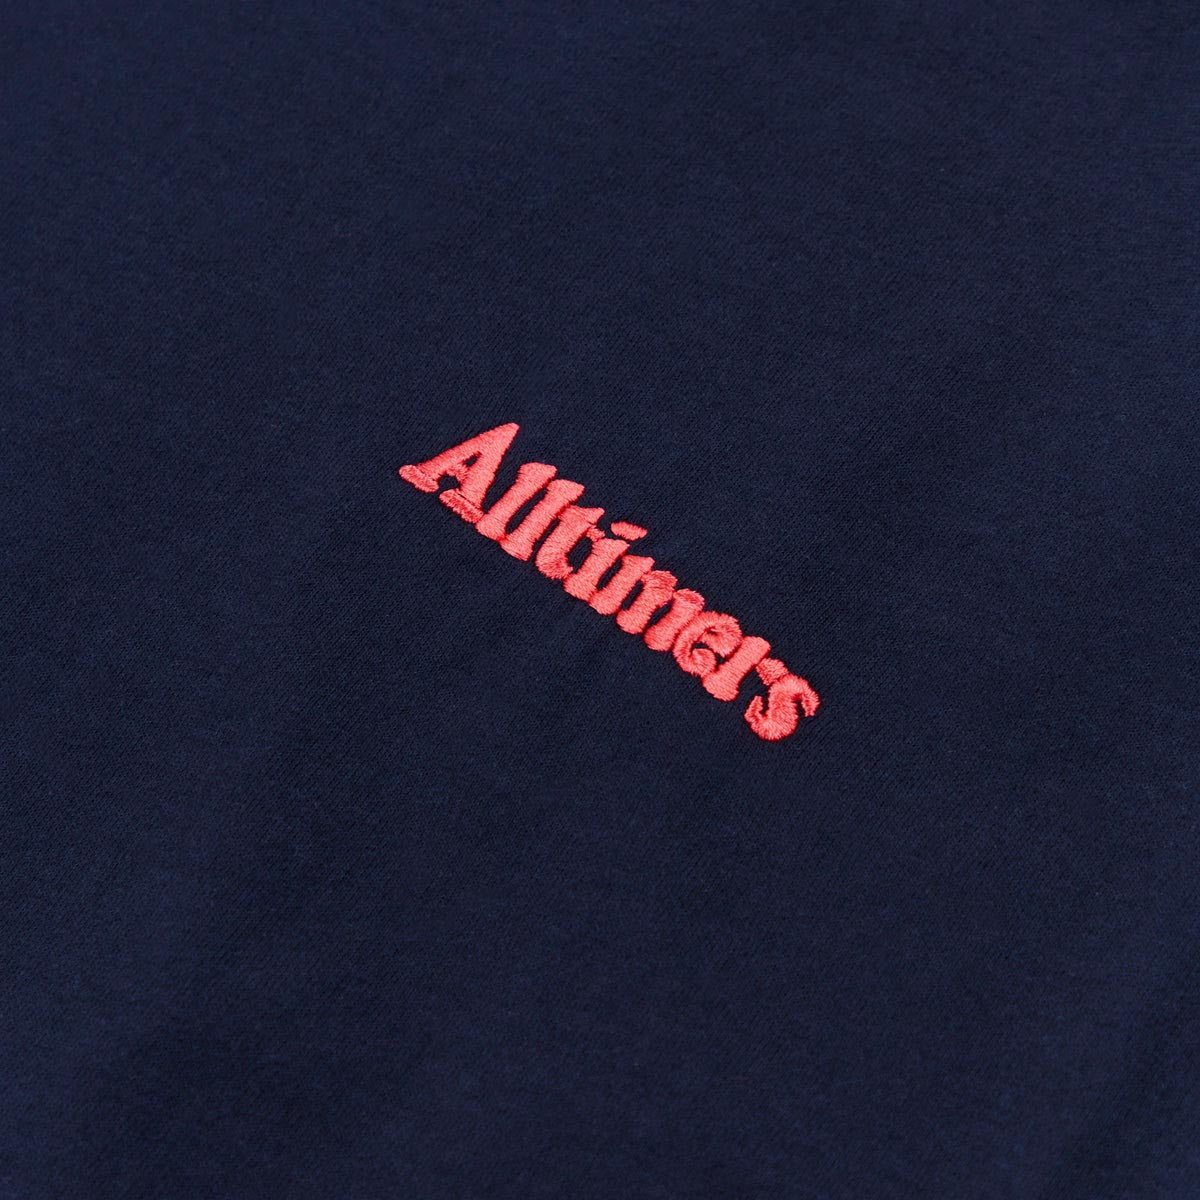 Alltimers Tiny Broadway Embroidered T-Shirt - Navy image 2